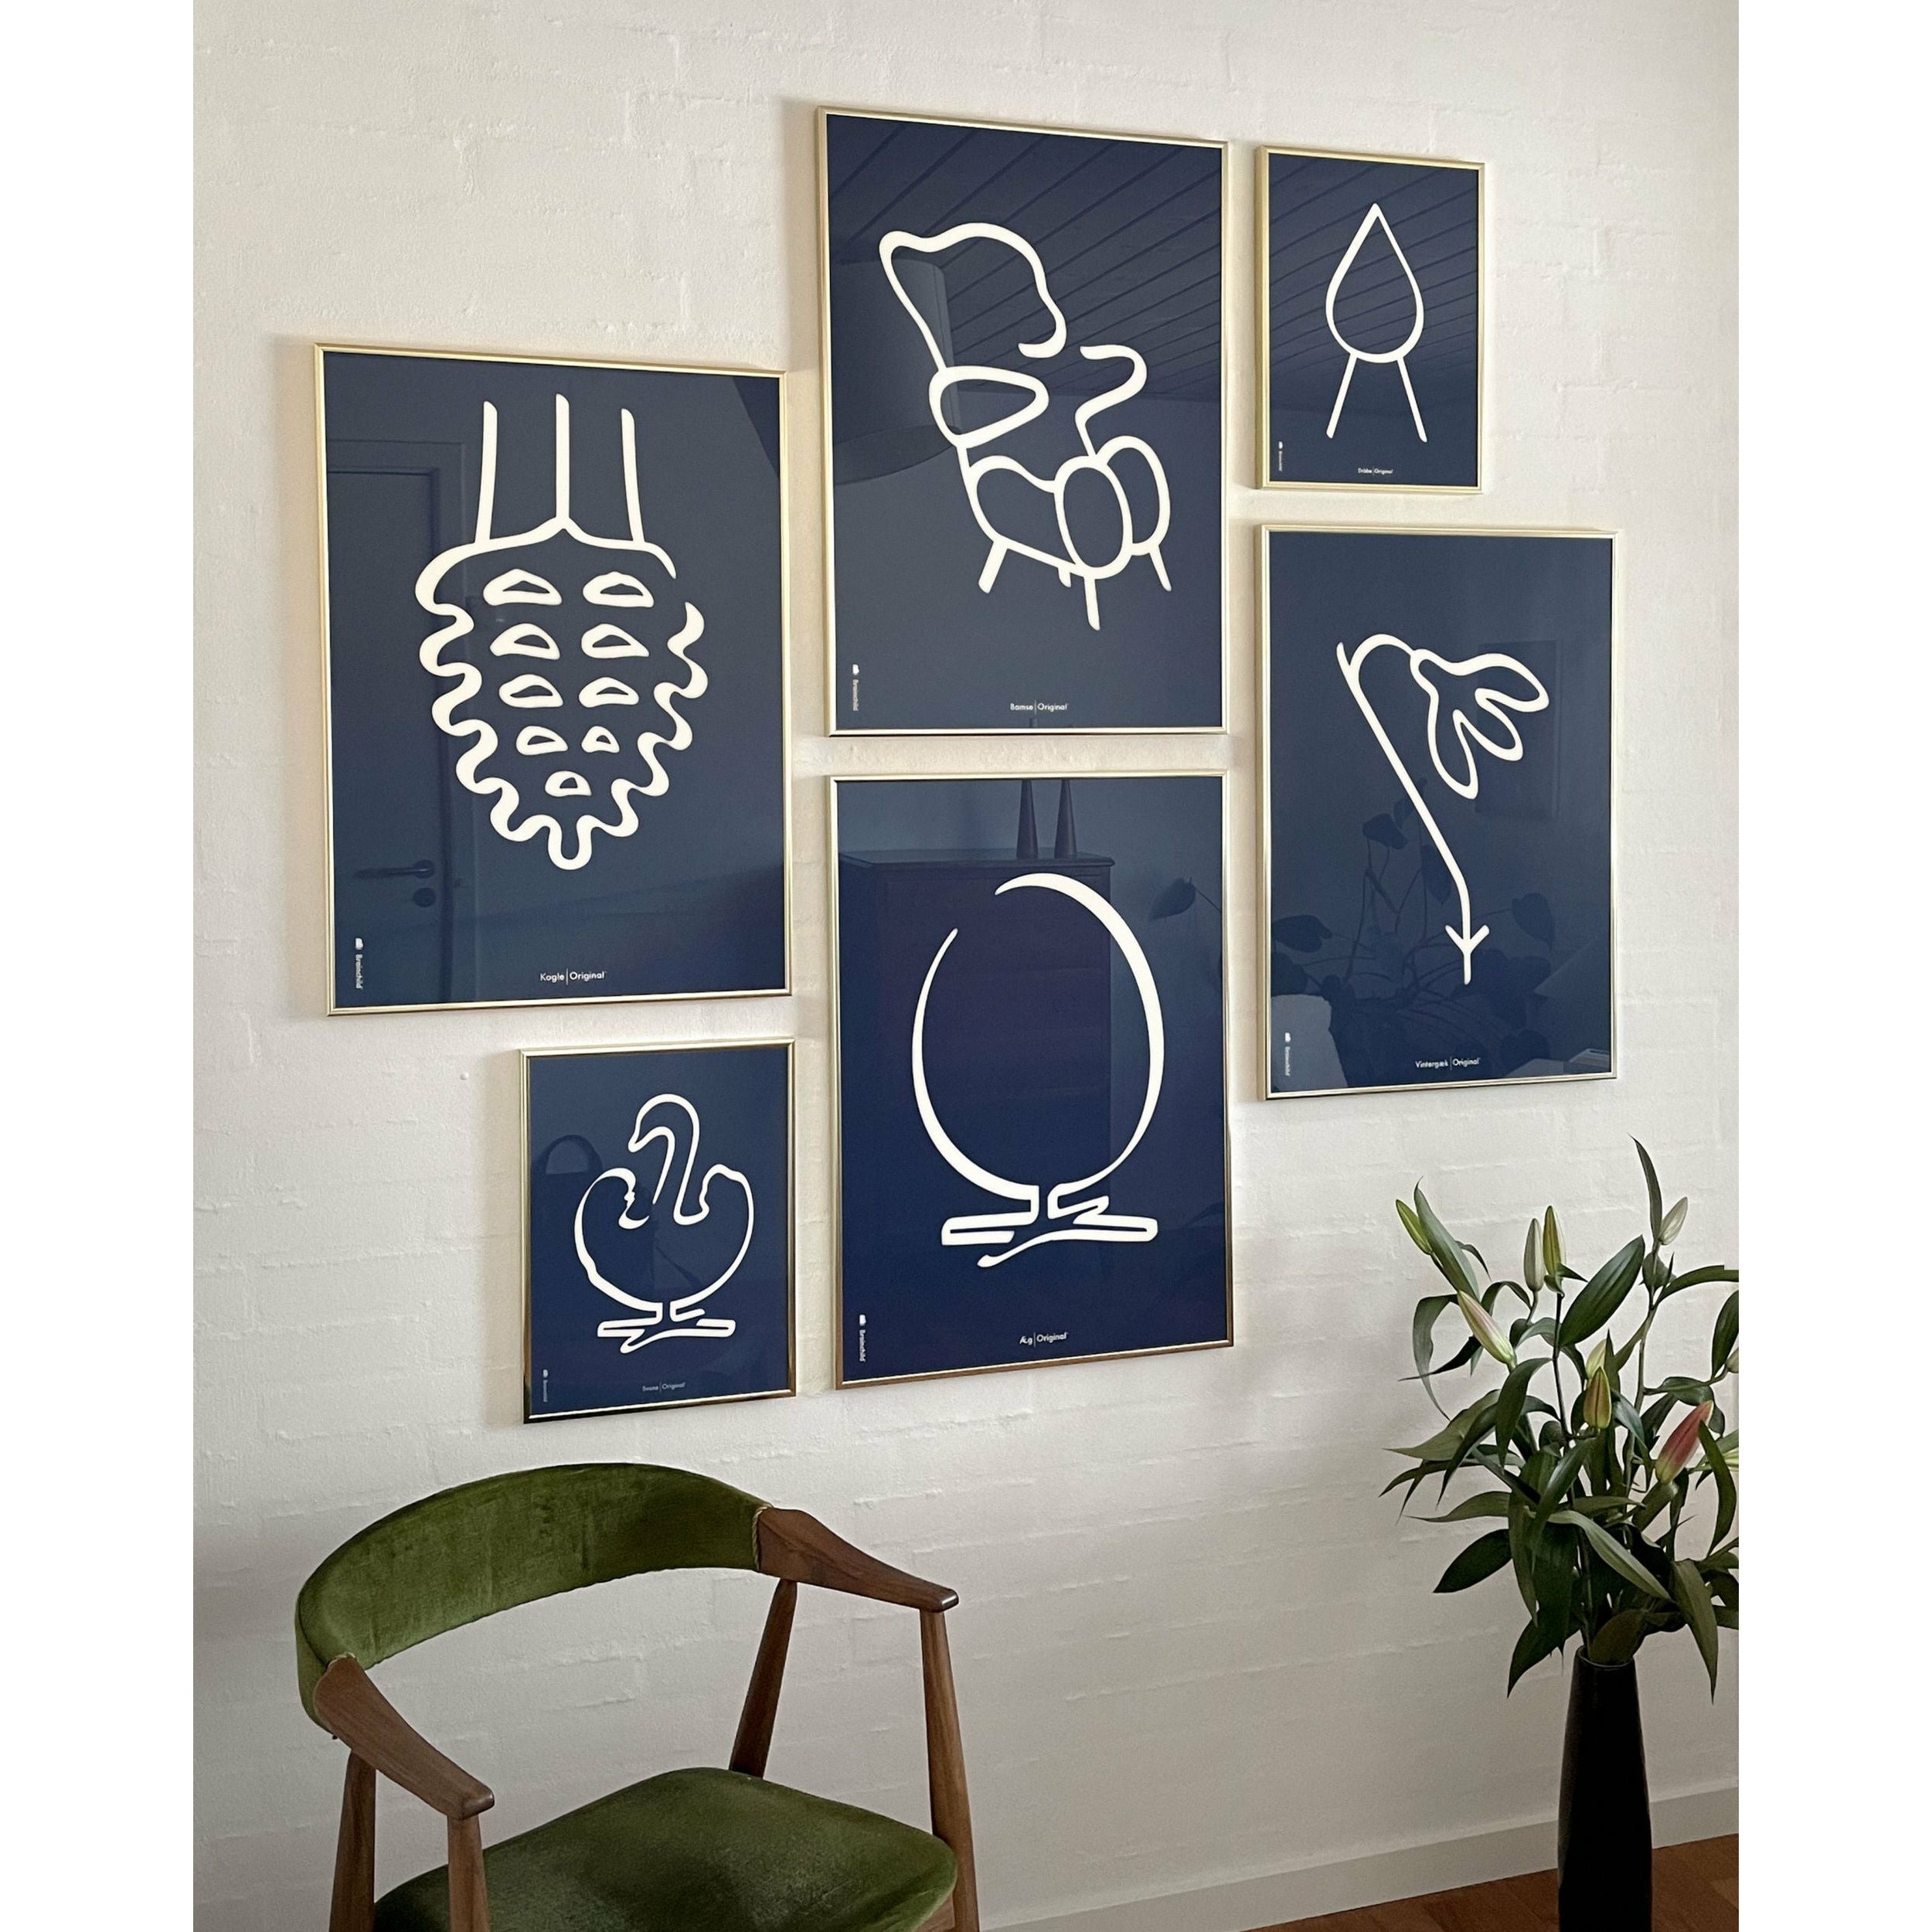 Brainchild Swan Line Poster, Frame In Black Lacquered Wood 70x100 Cm, Blue Background